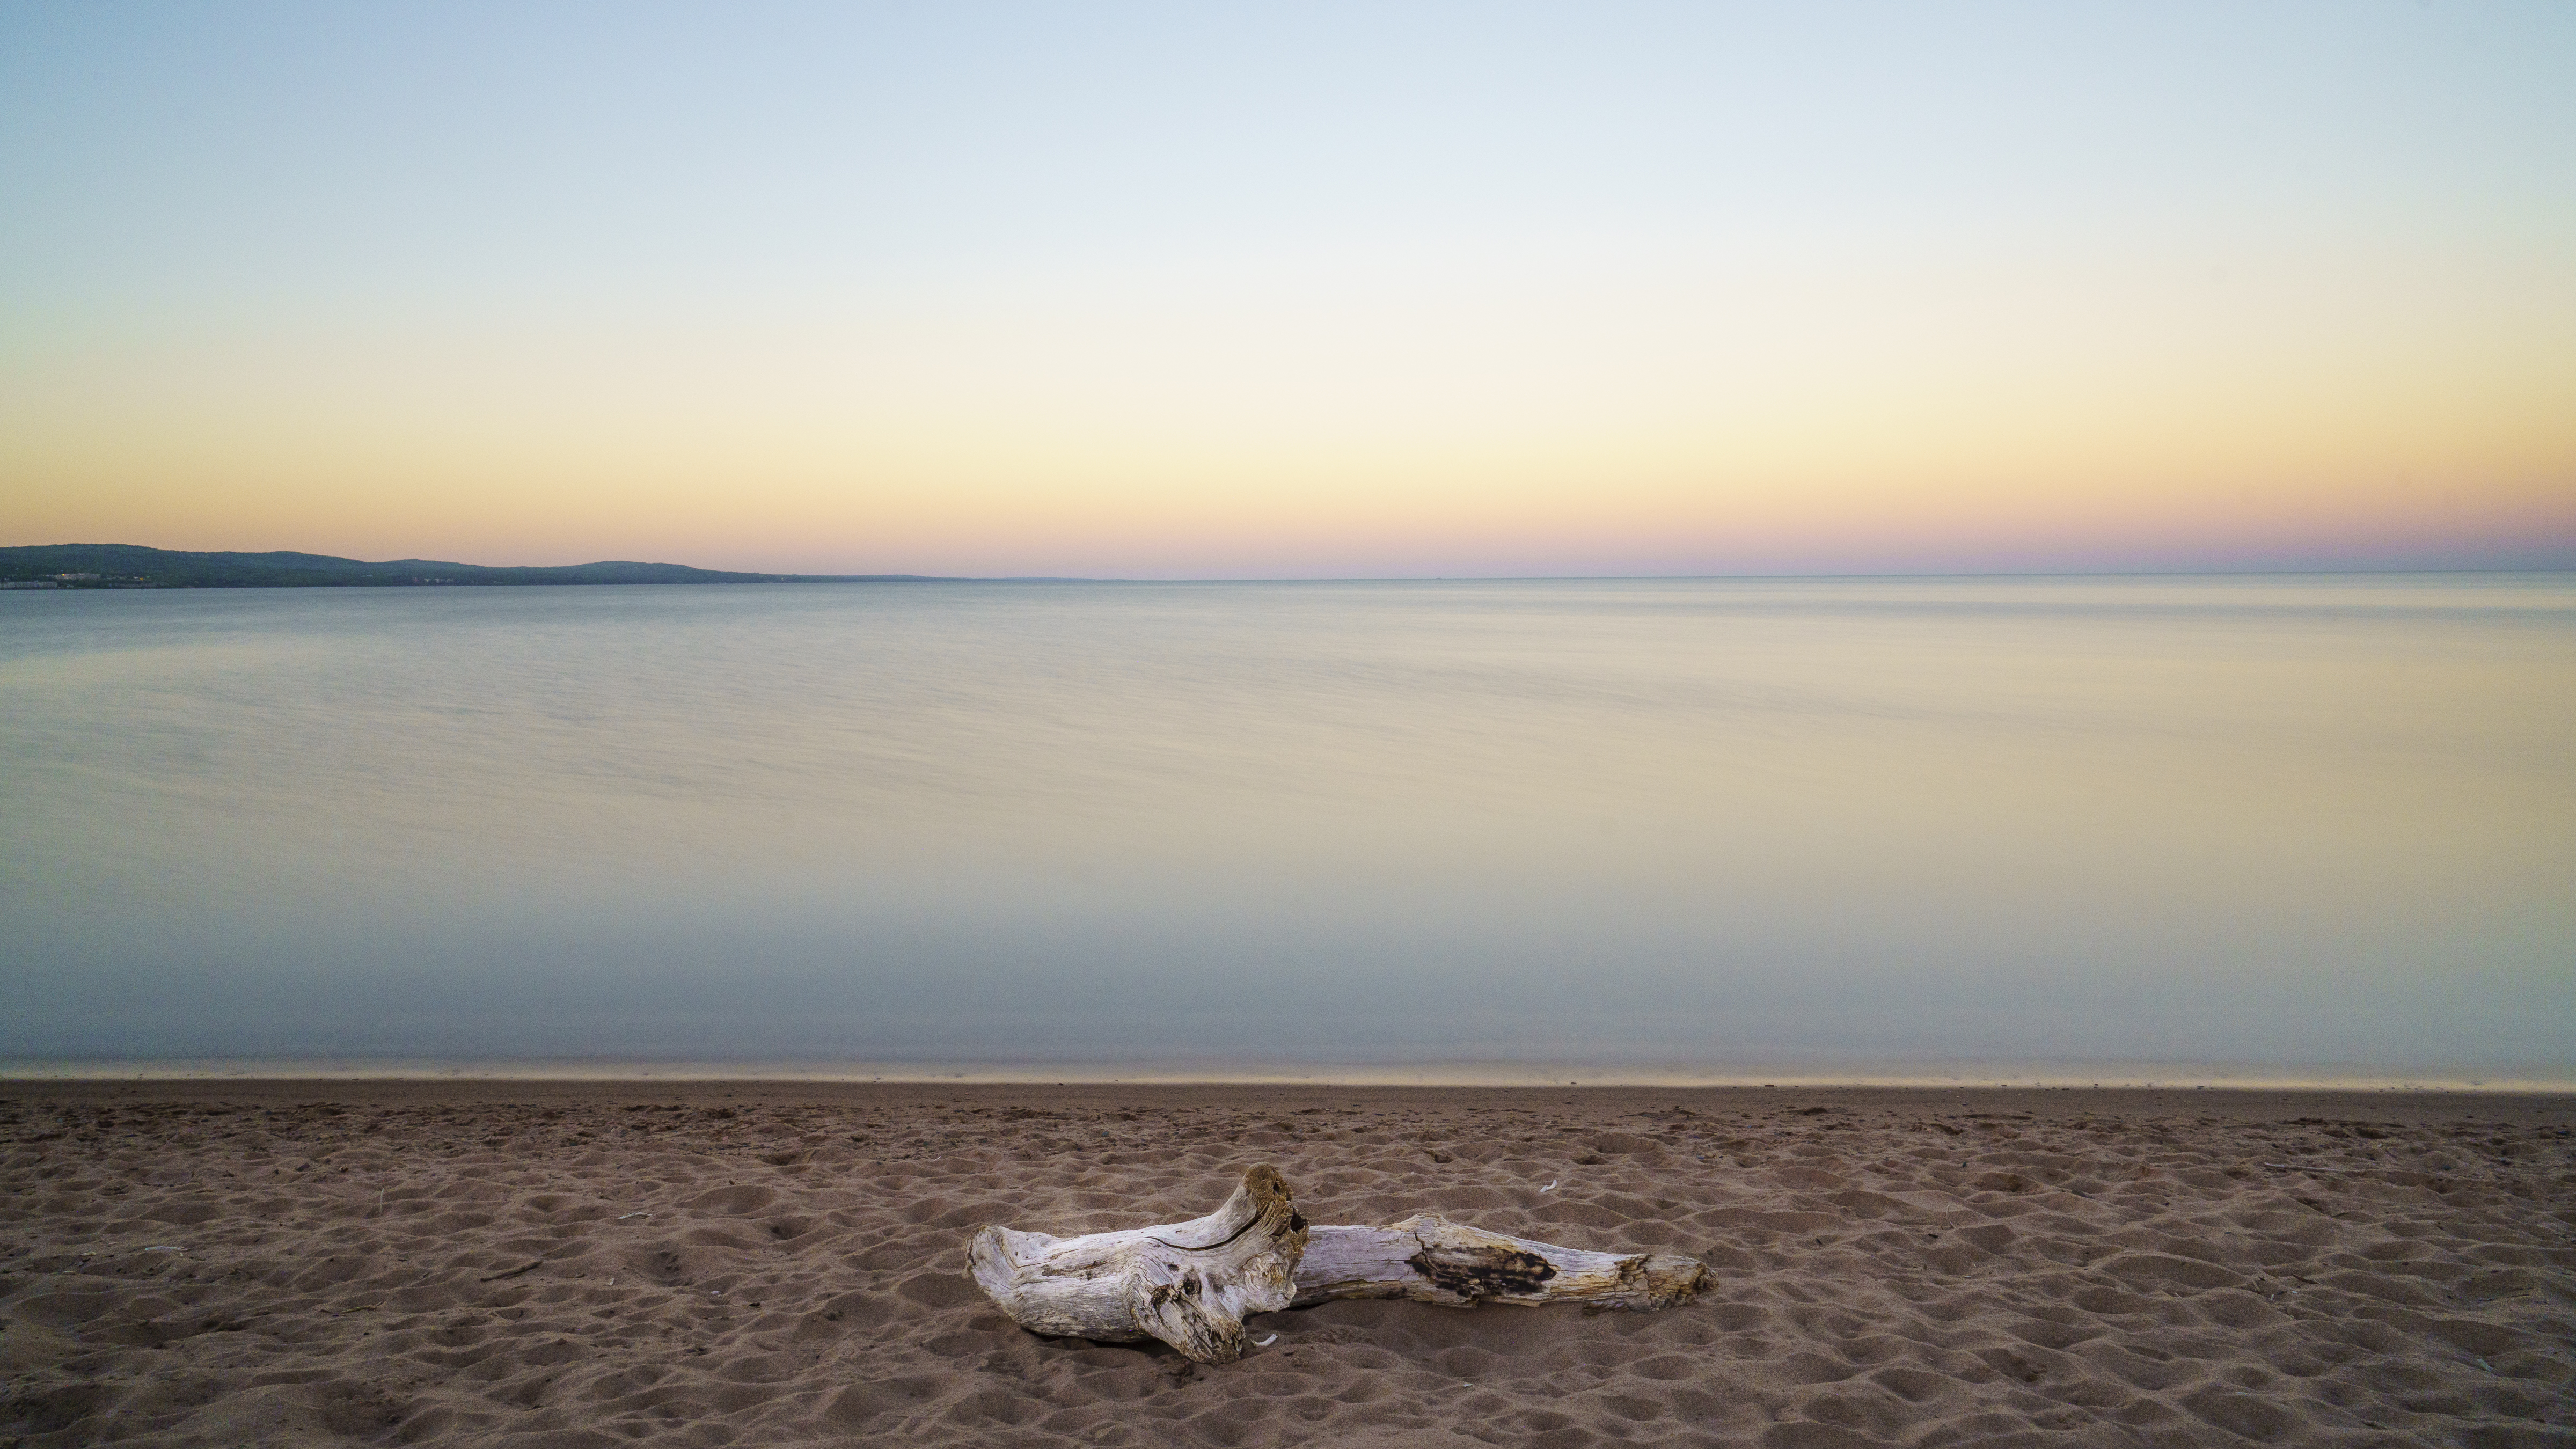 photograph of sandy shore with driftwood looking out onto body of water with a glowing horizon